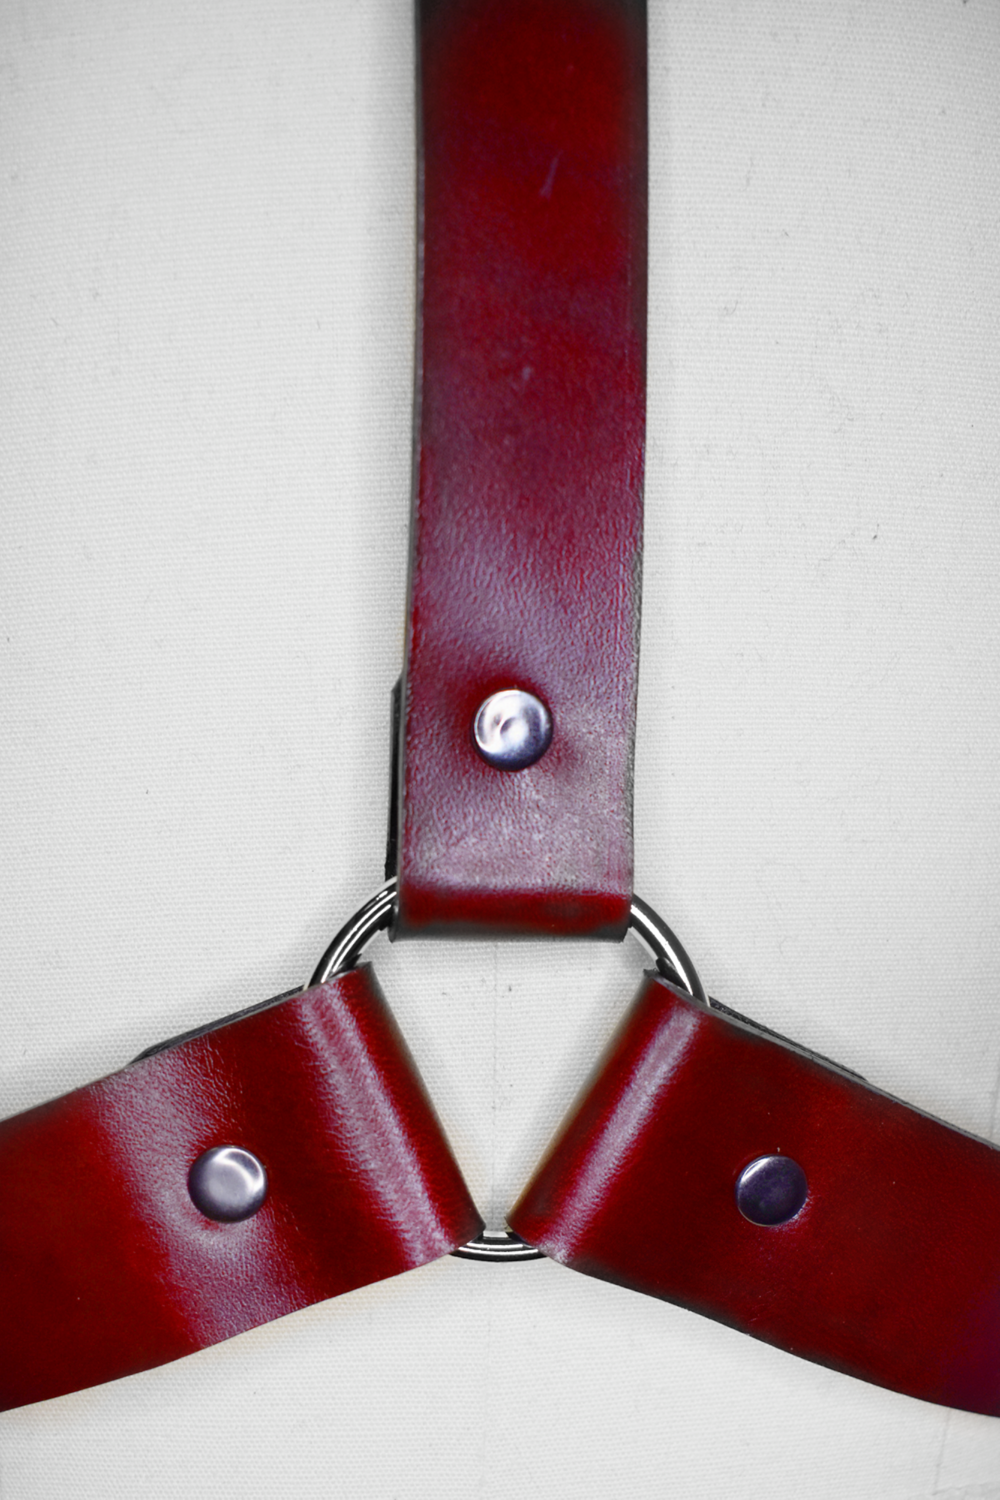 OXBLOOD LEATHER HARNESS